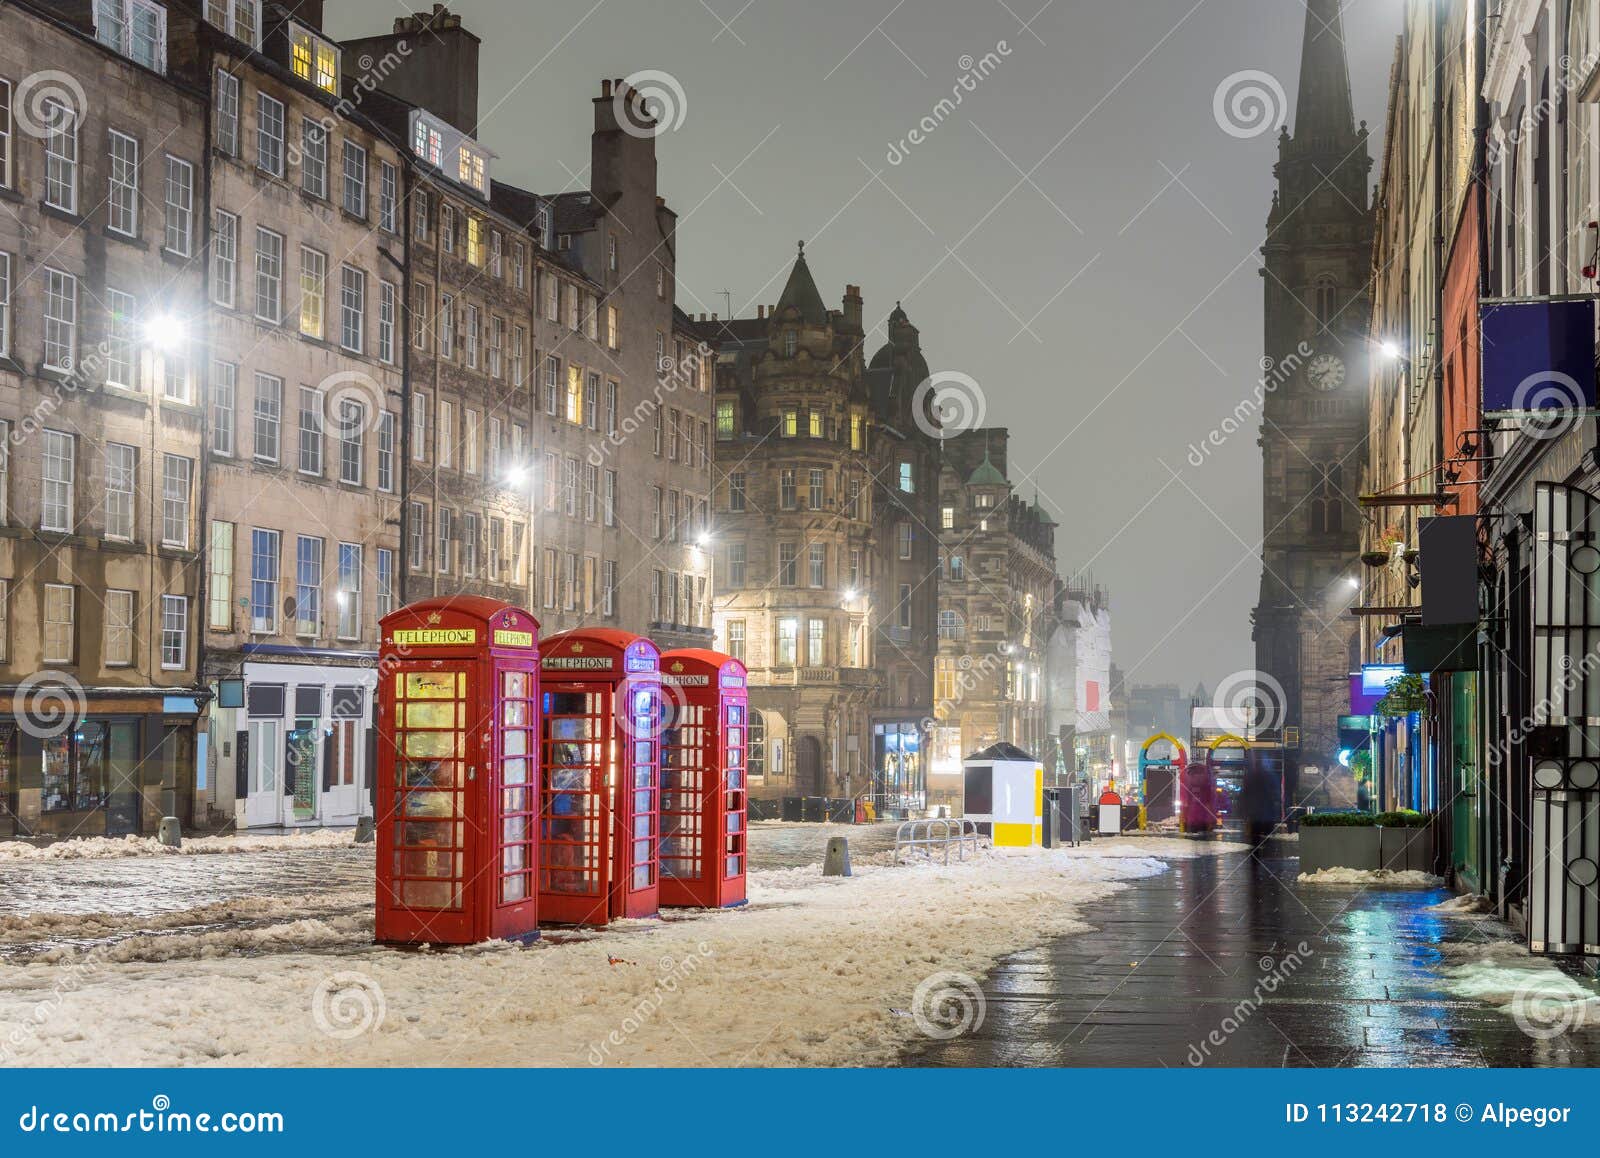 snow covered royal mile in edinburgh on a foggy winter day